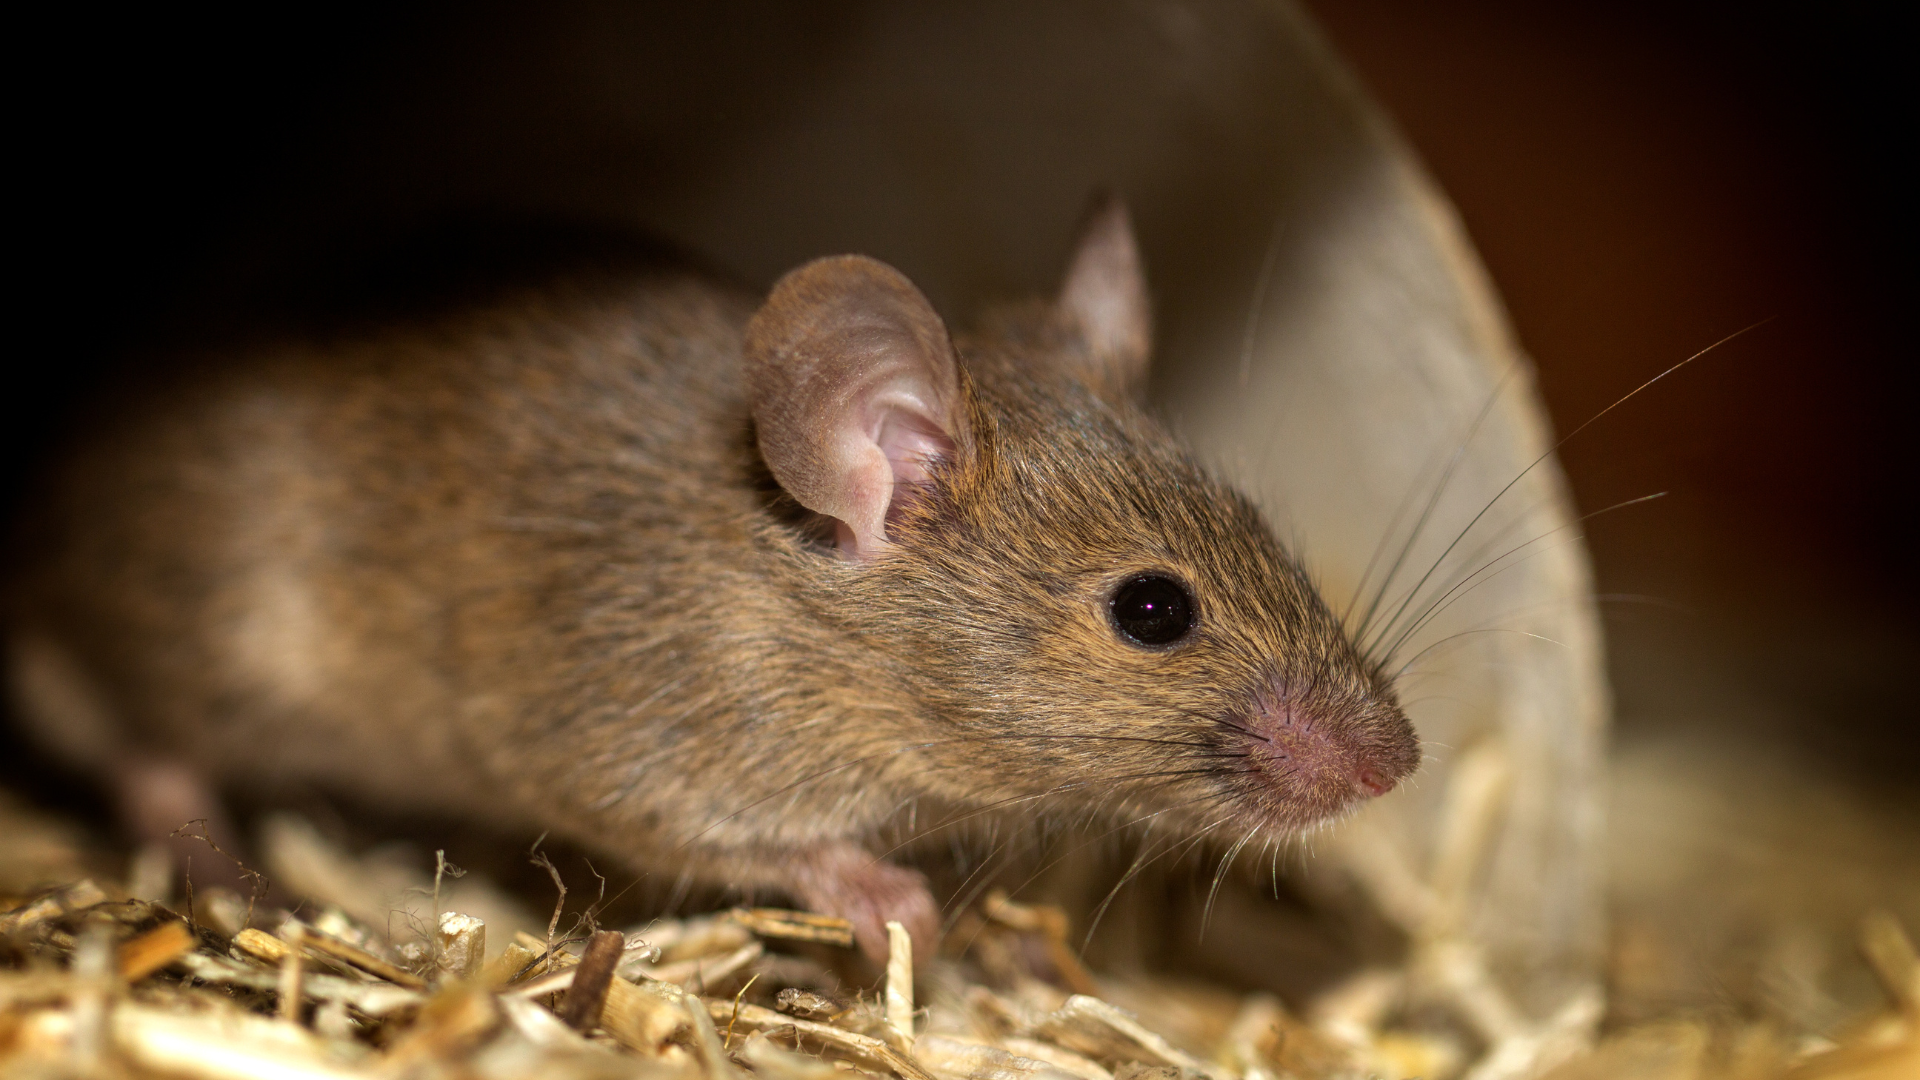 Rats To Eat Contraceptive Pill For Birth Control In The City?